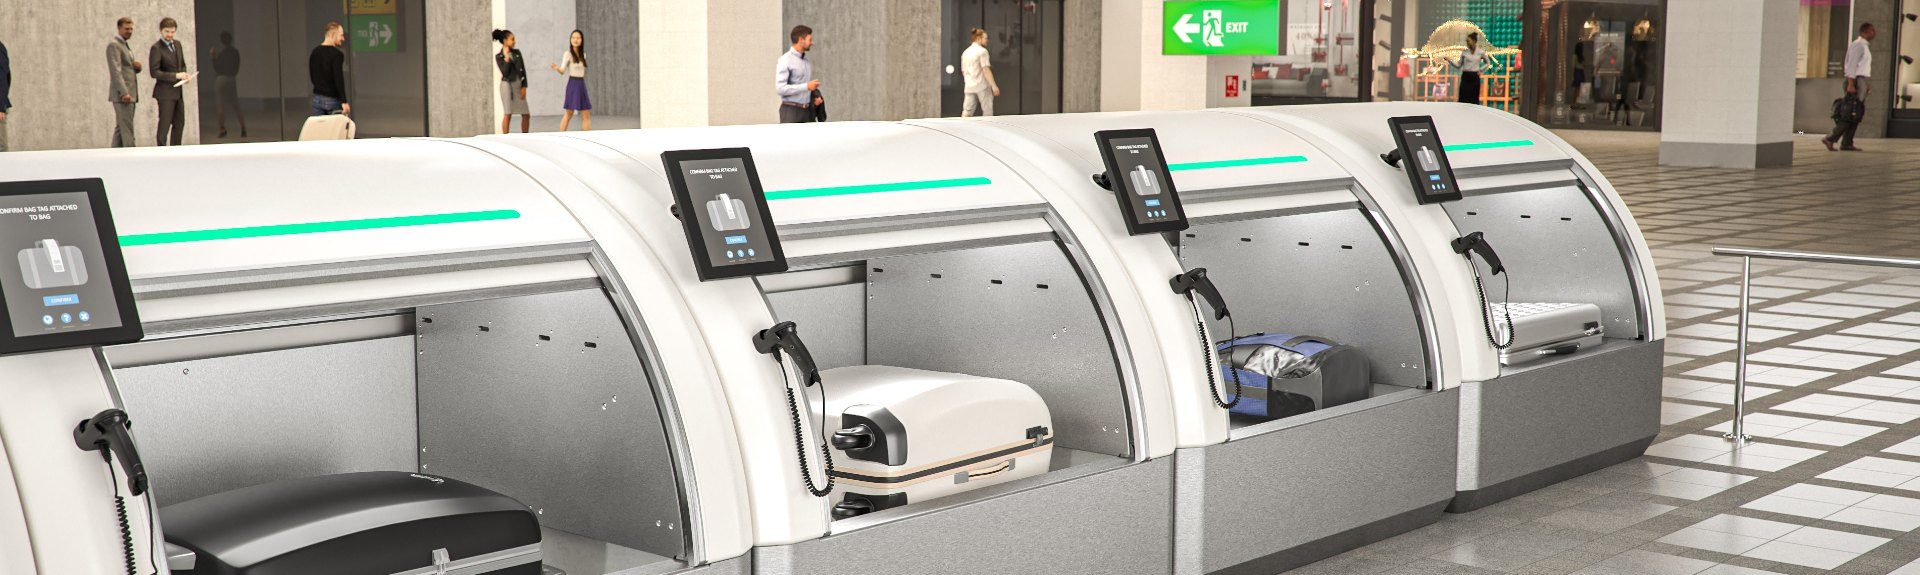 SriLankan Airlines starts Self Check-in and Self Bagdrop at Colombo -  PASSENGER SELF SERVICE